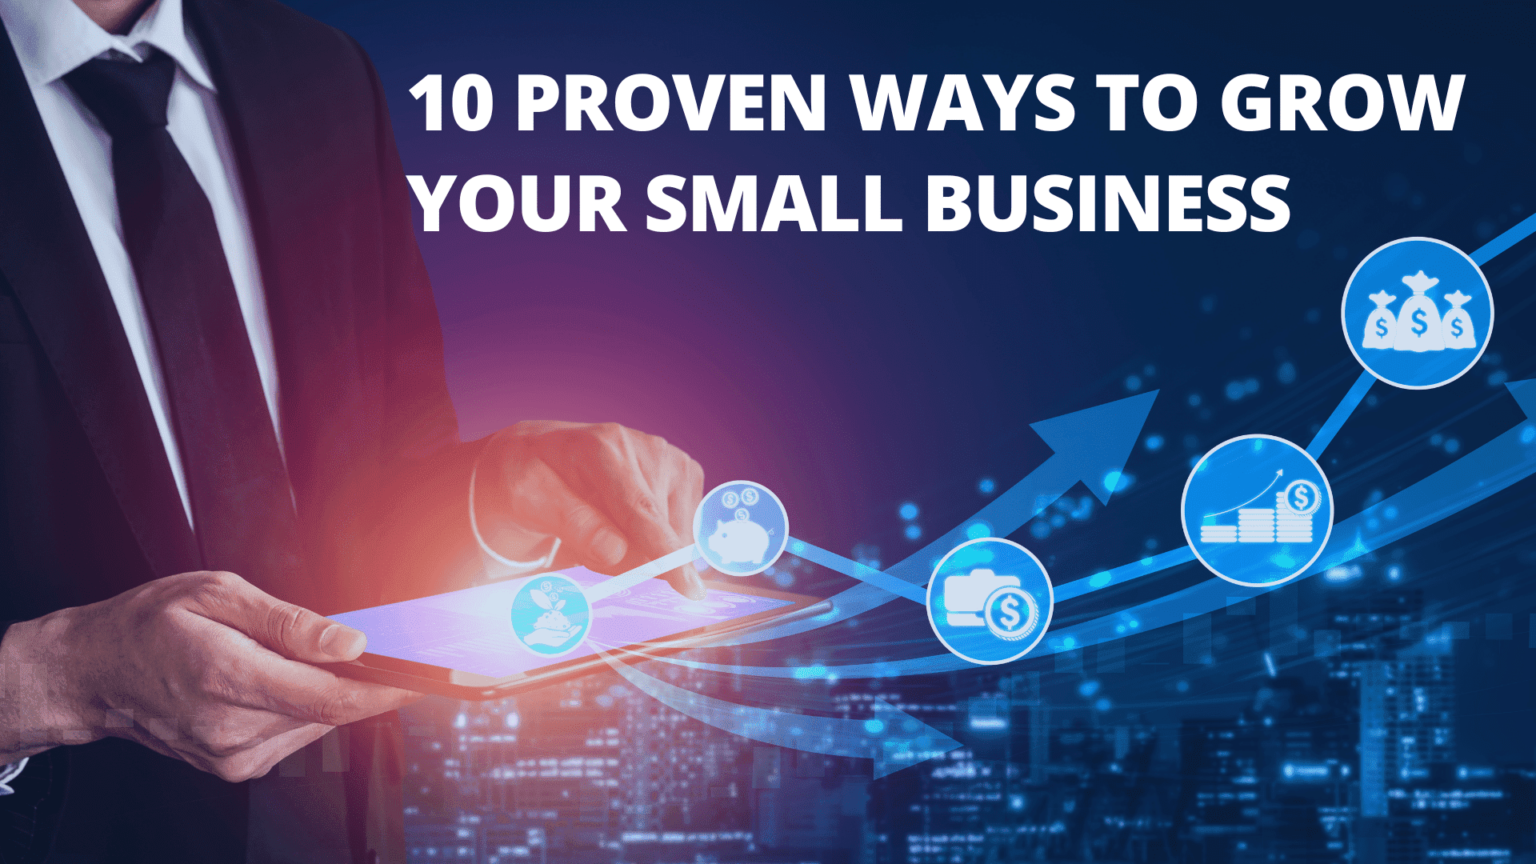 blog-10 Proven Ways to Grow Your Small Business